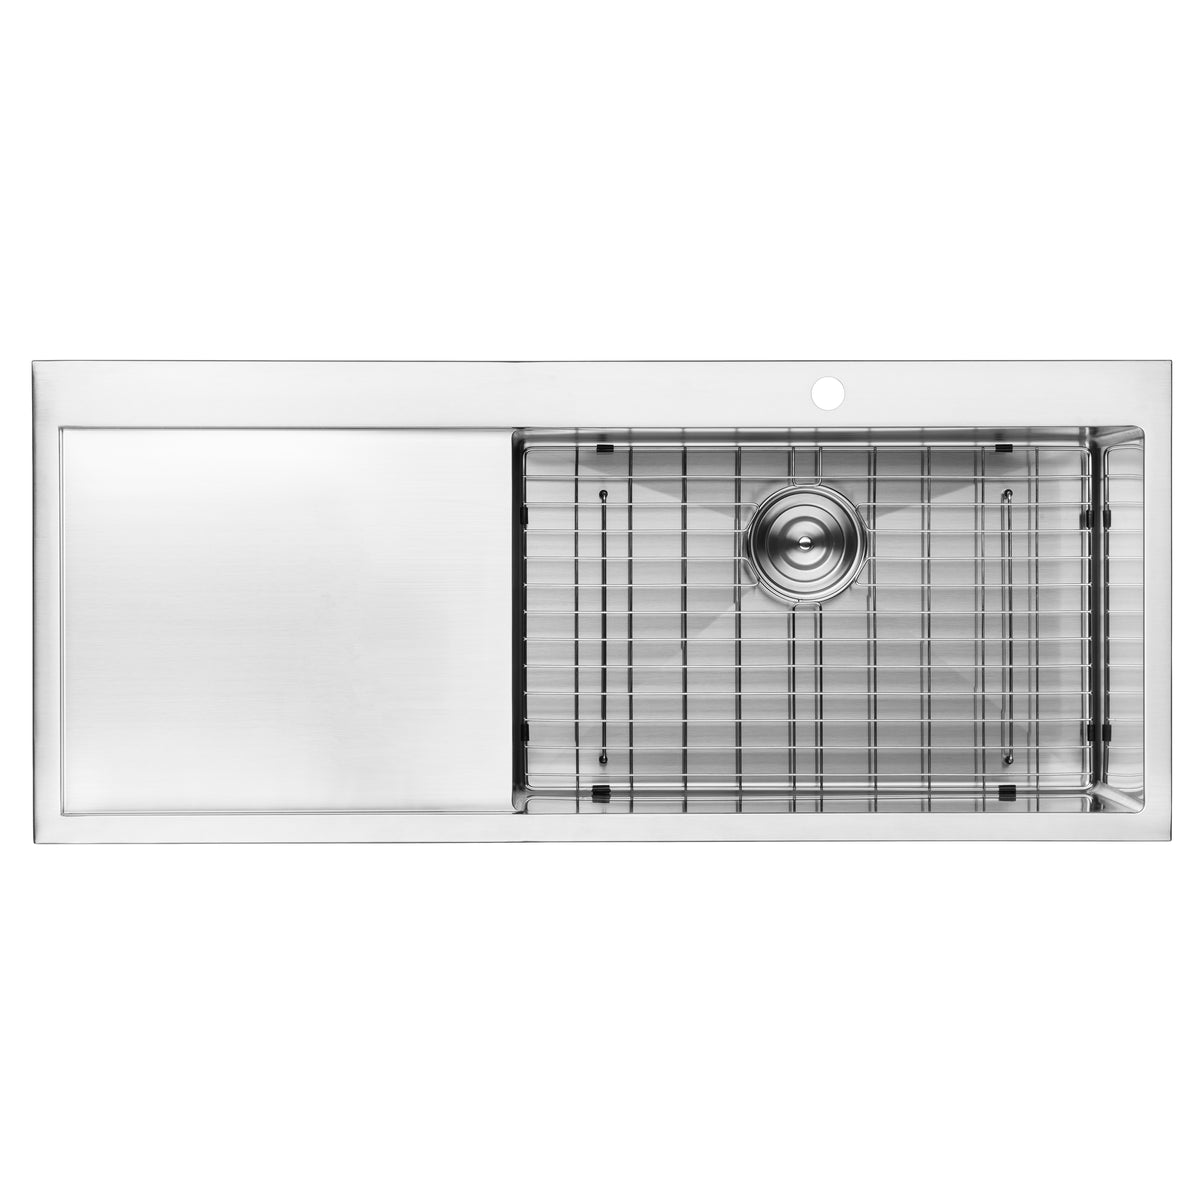 https://www.shopmegabai.shop/wp-content/uploads/1695/95/save-money-on-bai-1232-stainless-steel-16-gauge-kitchen-sink-handmade-48-inch-top-mount-single-bowl-with-drainboard-housestar-benefit-from-the-finest-services-and-products-at-reasonable-prices_2.jpg